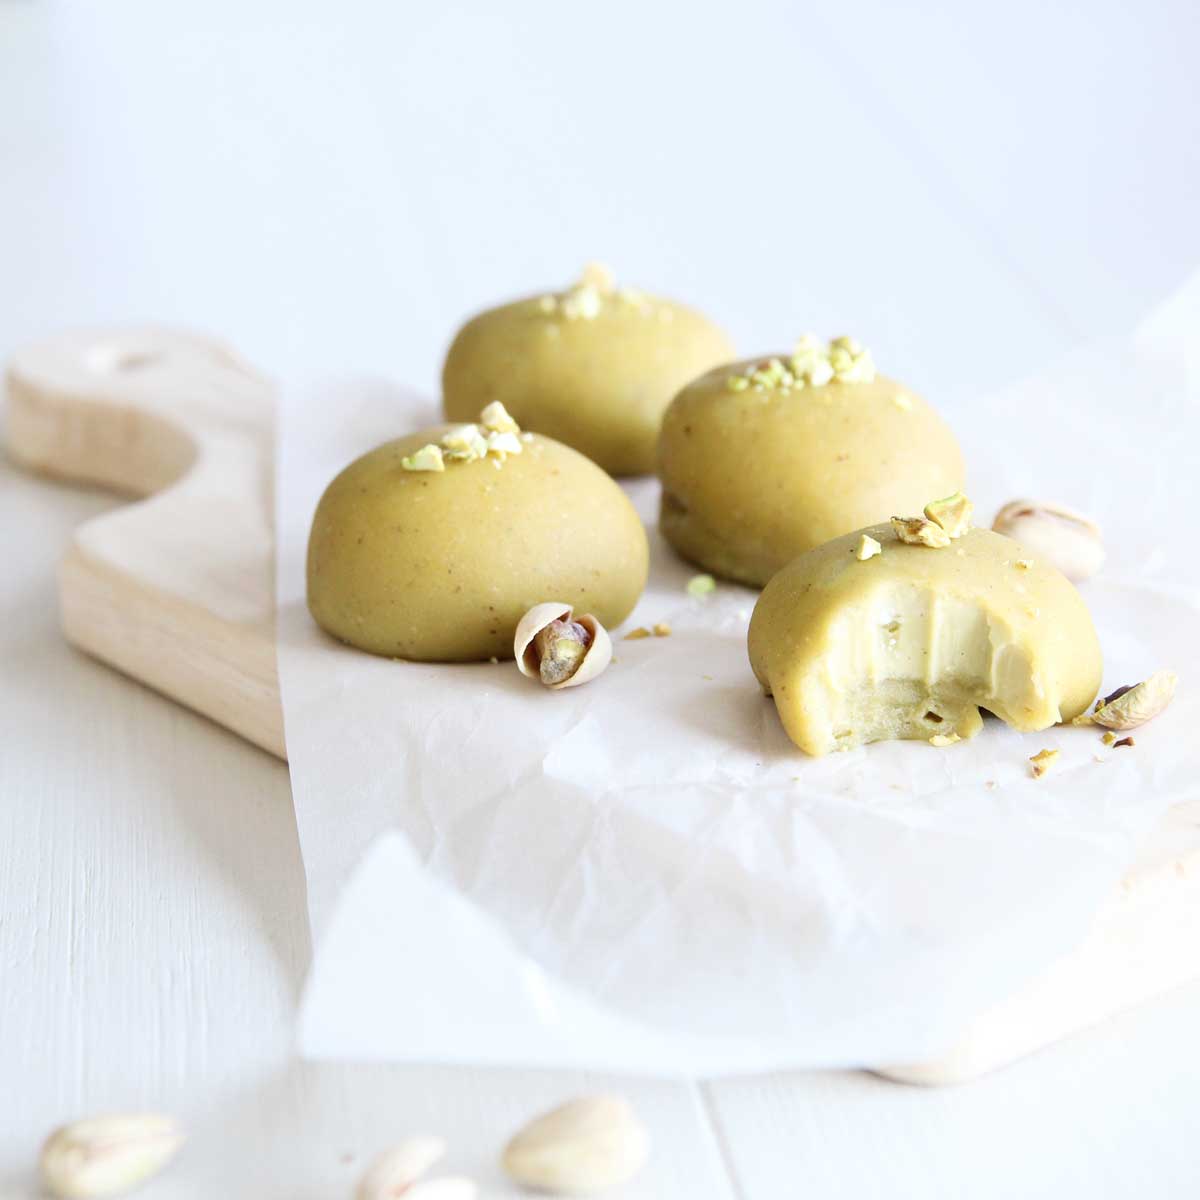 The Best Ever Pistachio Butter Mochi (Made with Mochiko Flour) - Banana Chocolate Mochi